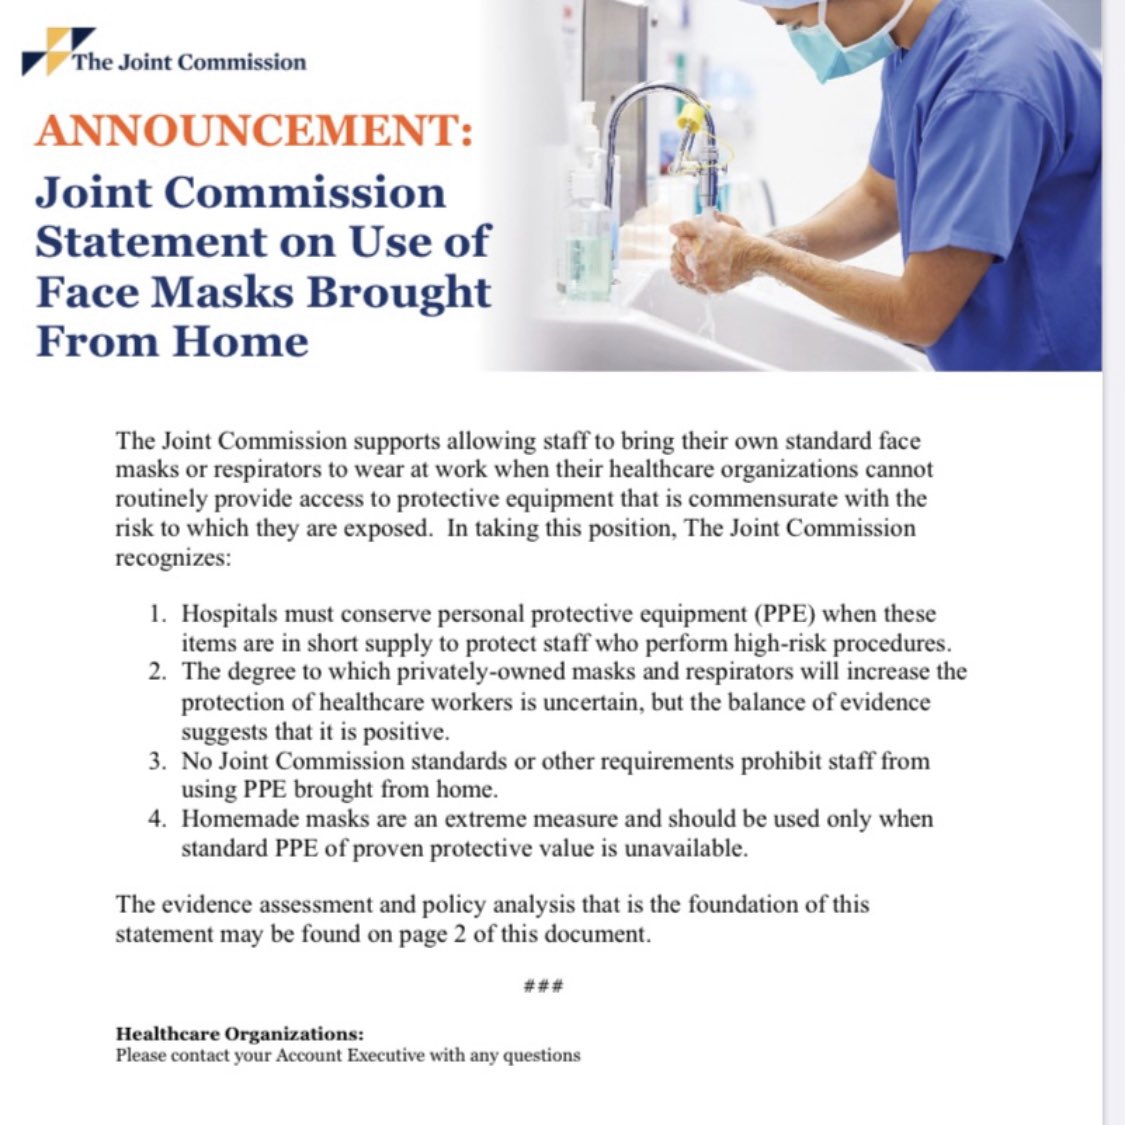 Amazing! The Joint Commission is supporting healthcare providers in using their own N95s when not provided!!